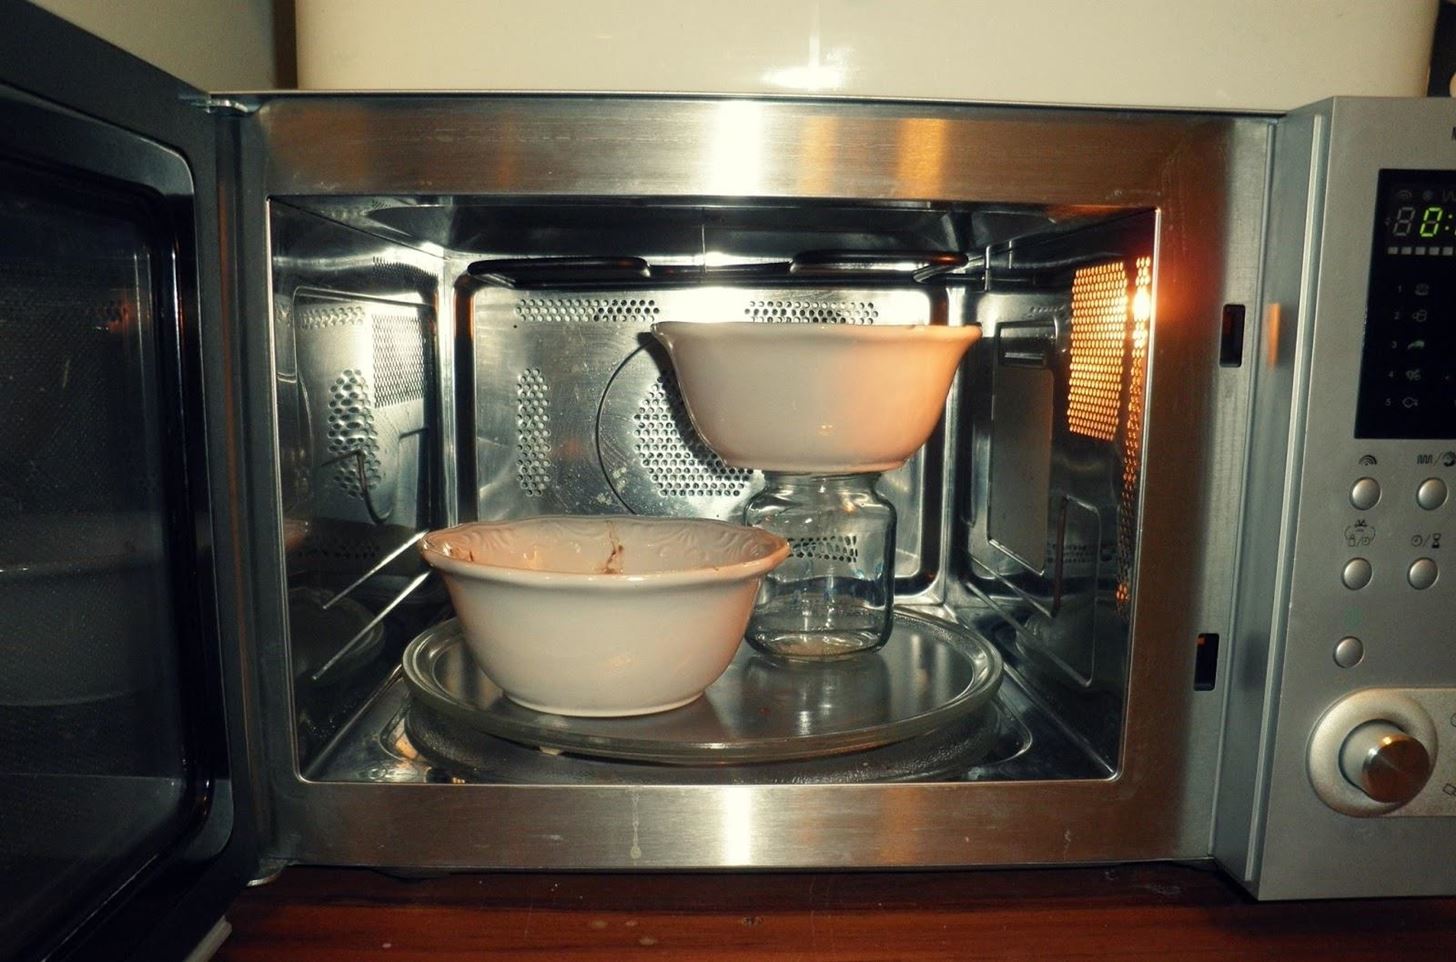 10 Tricks You Need to Use for Better-Tasting Food from Your Microwave